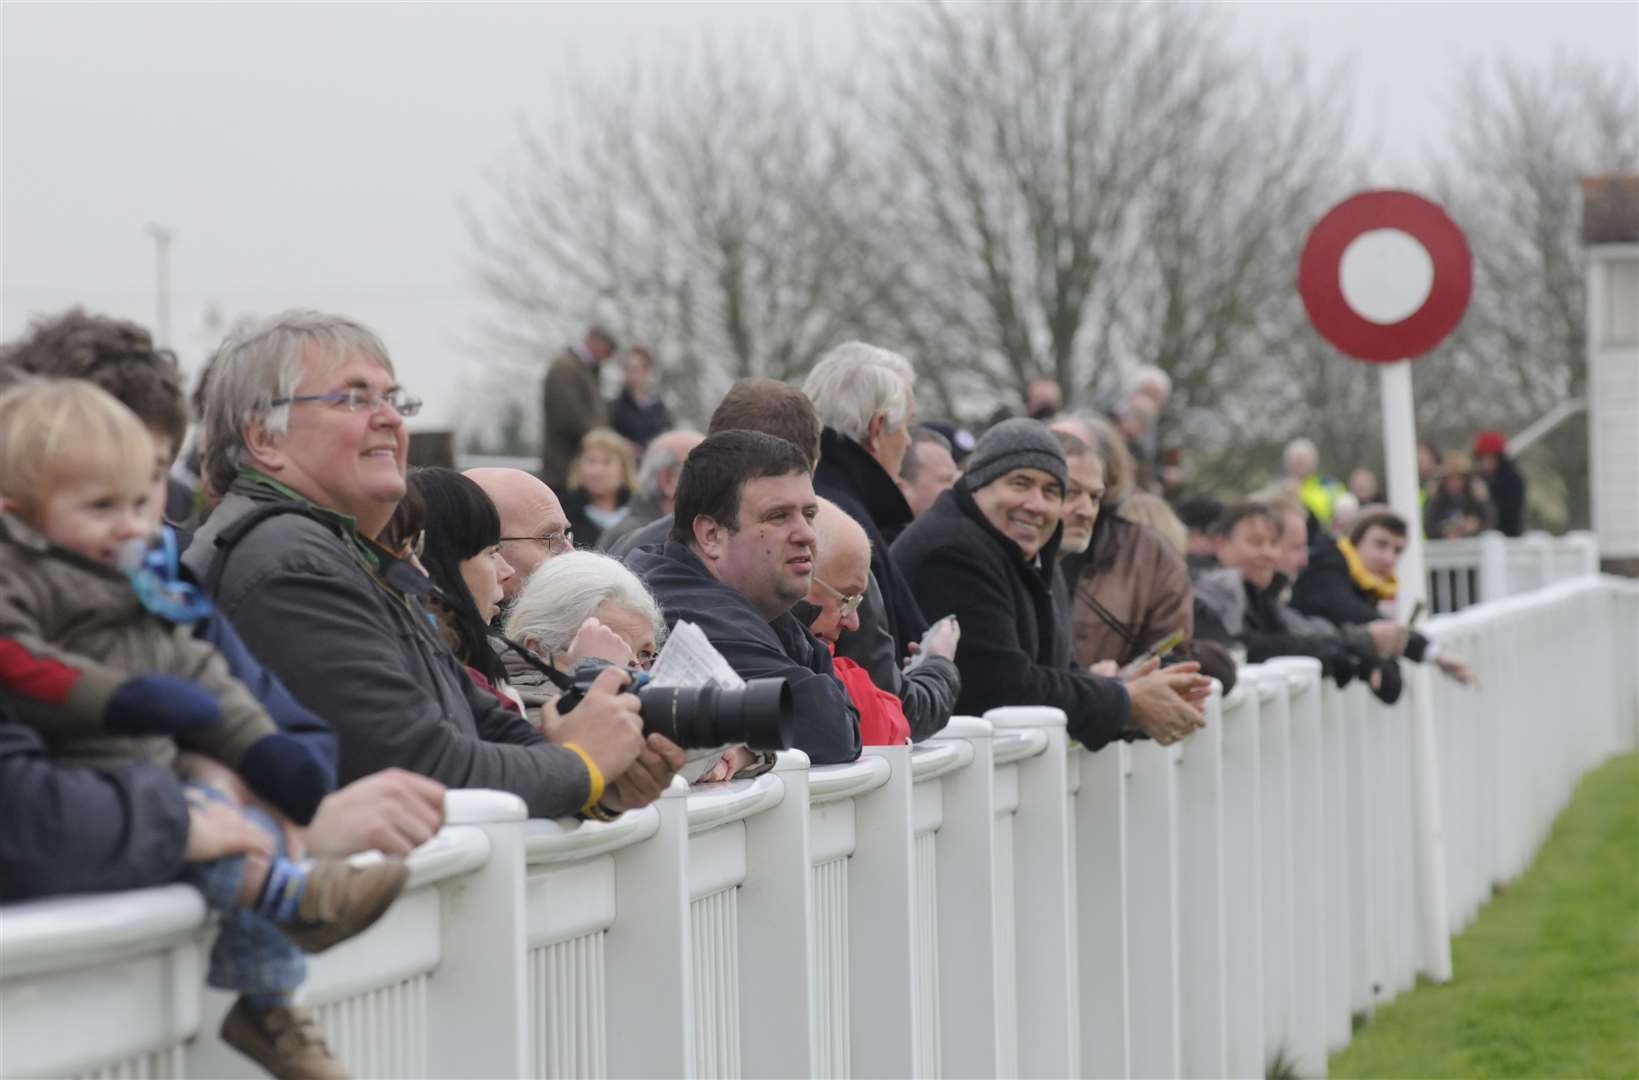 Racing fans at the Folkestone track for the final meeting. Picture: Paul Amos